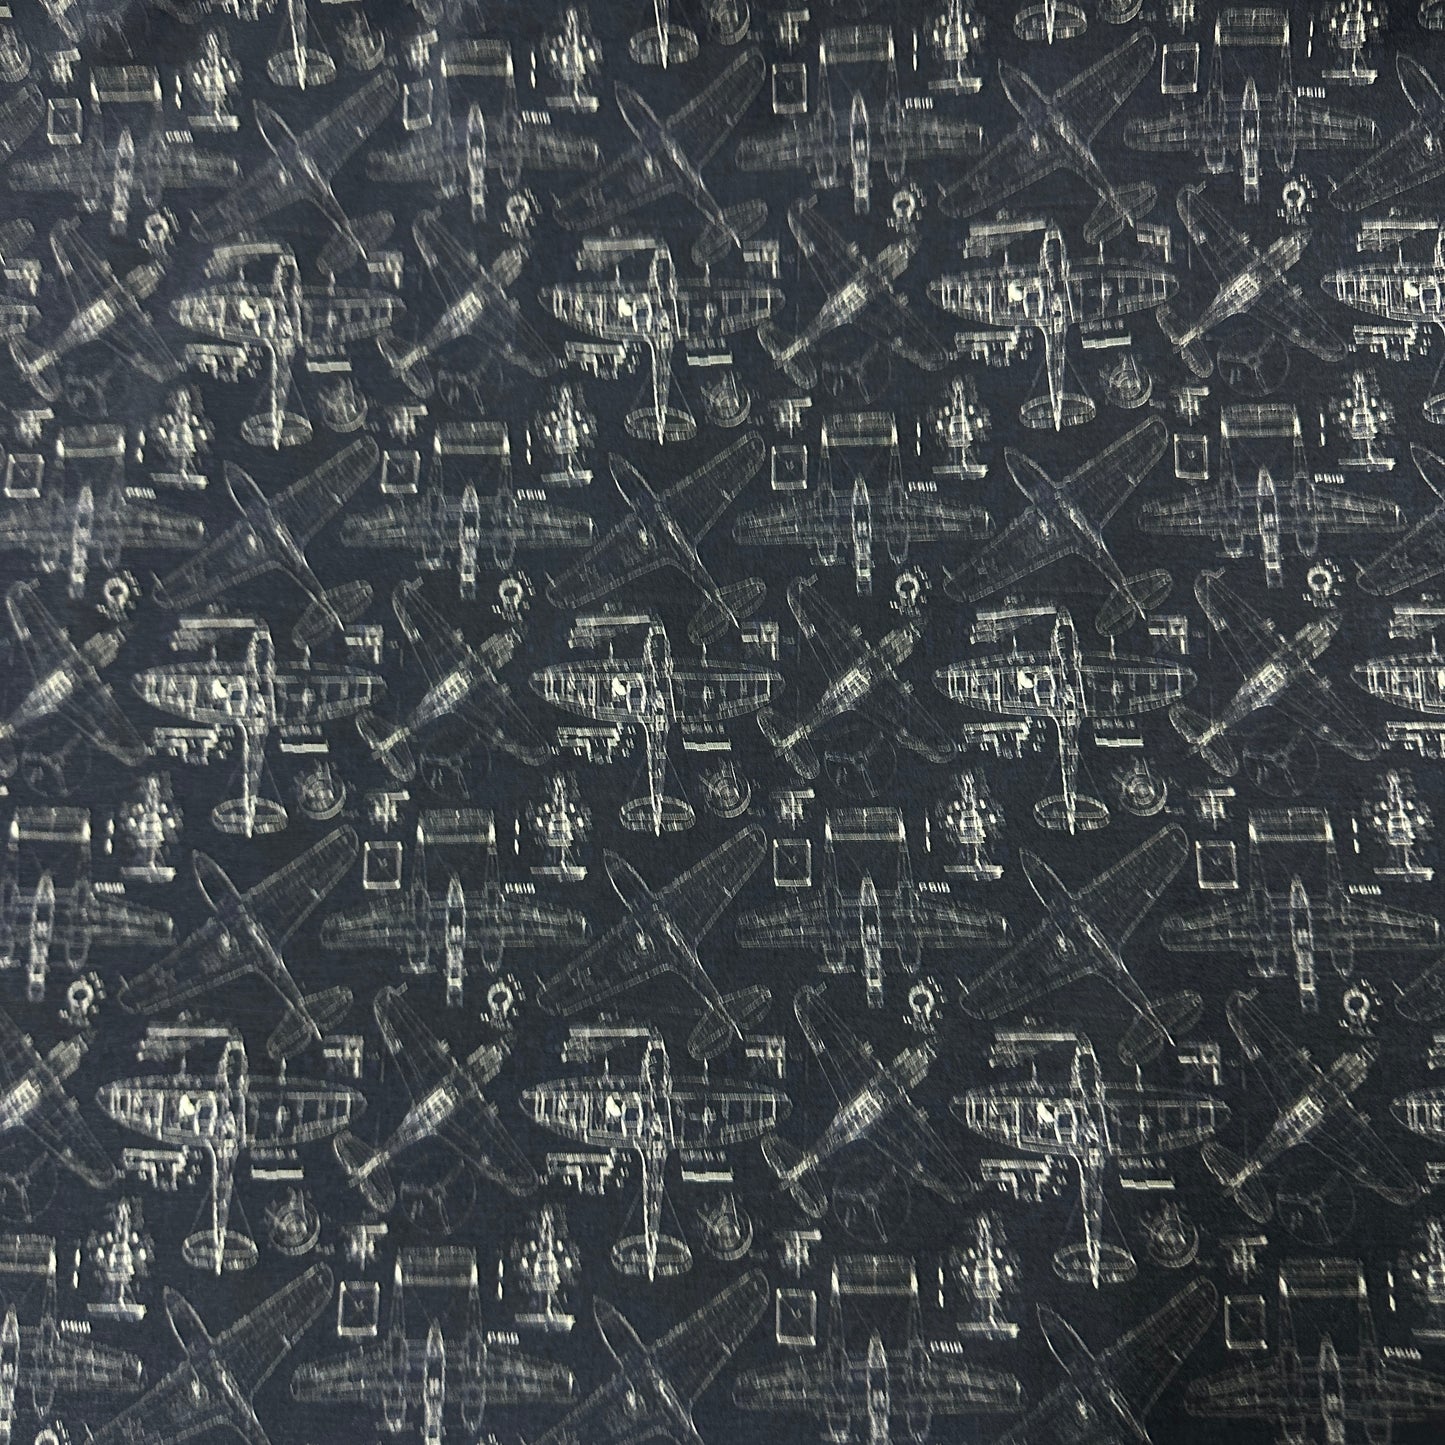 Airplane Blueprints on Bamboo/Spandex Jersey Fabric